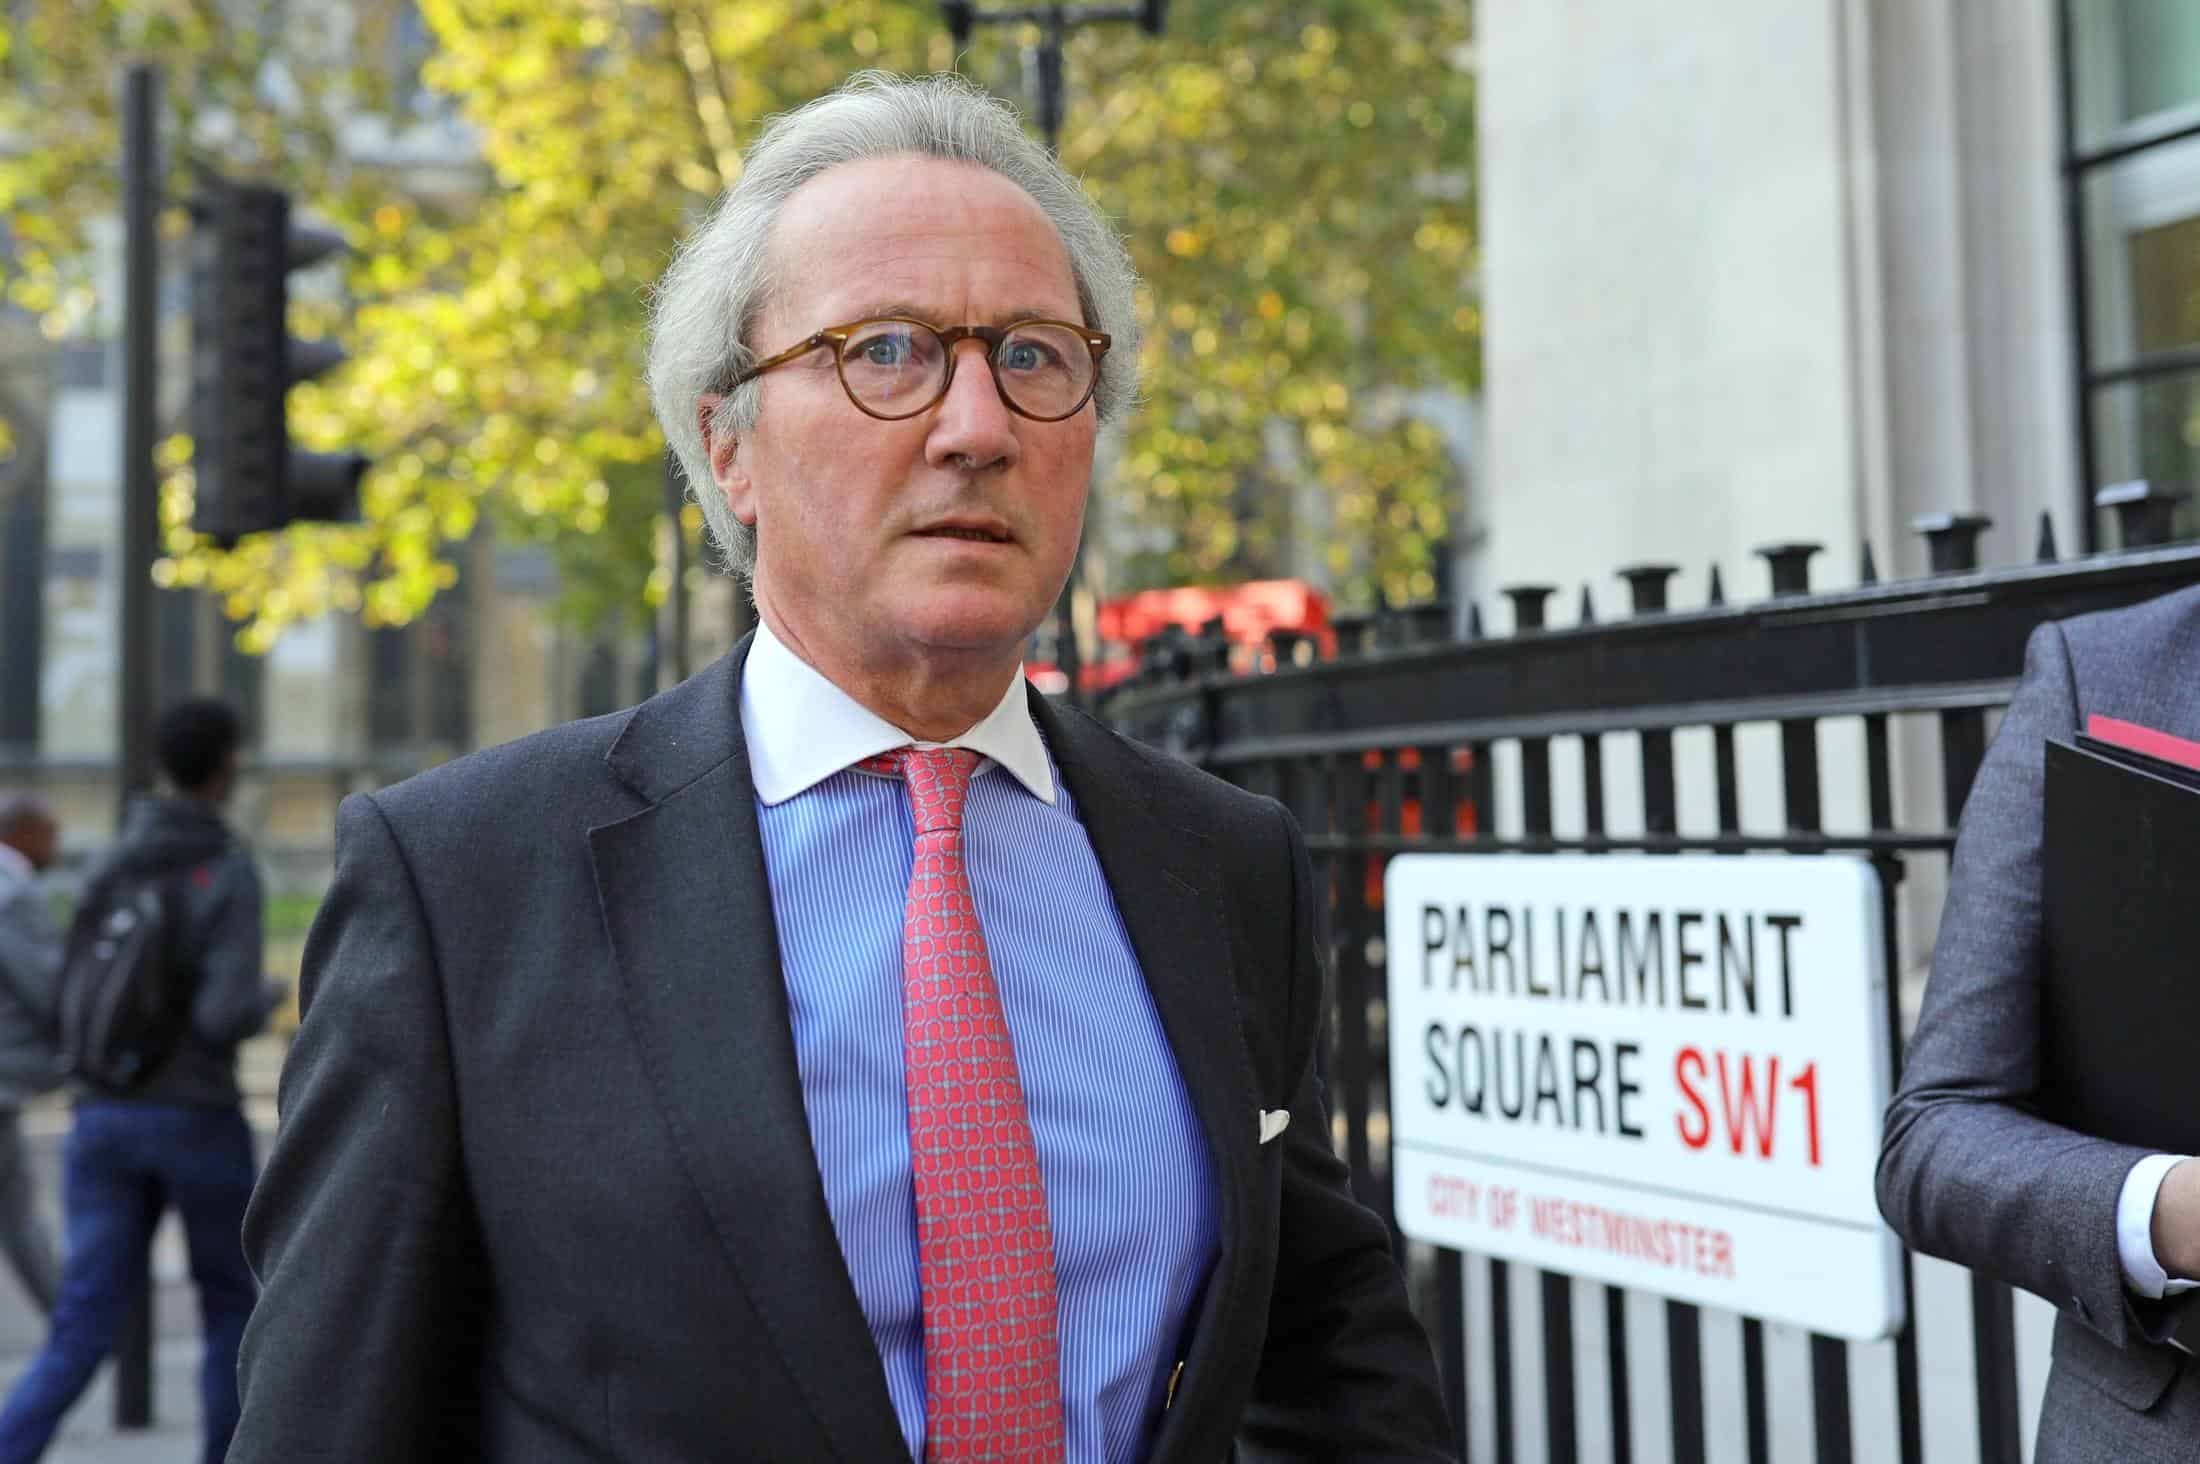 Lord Keen resigns amid Brexit Internal Market Bill row but hasn’t heard back from PM